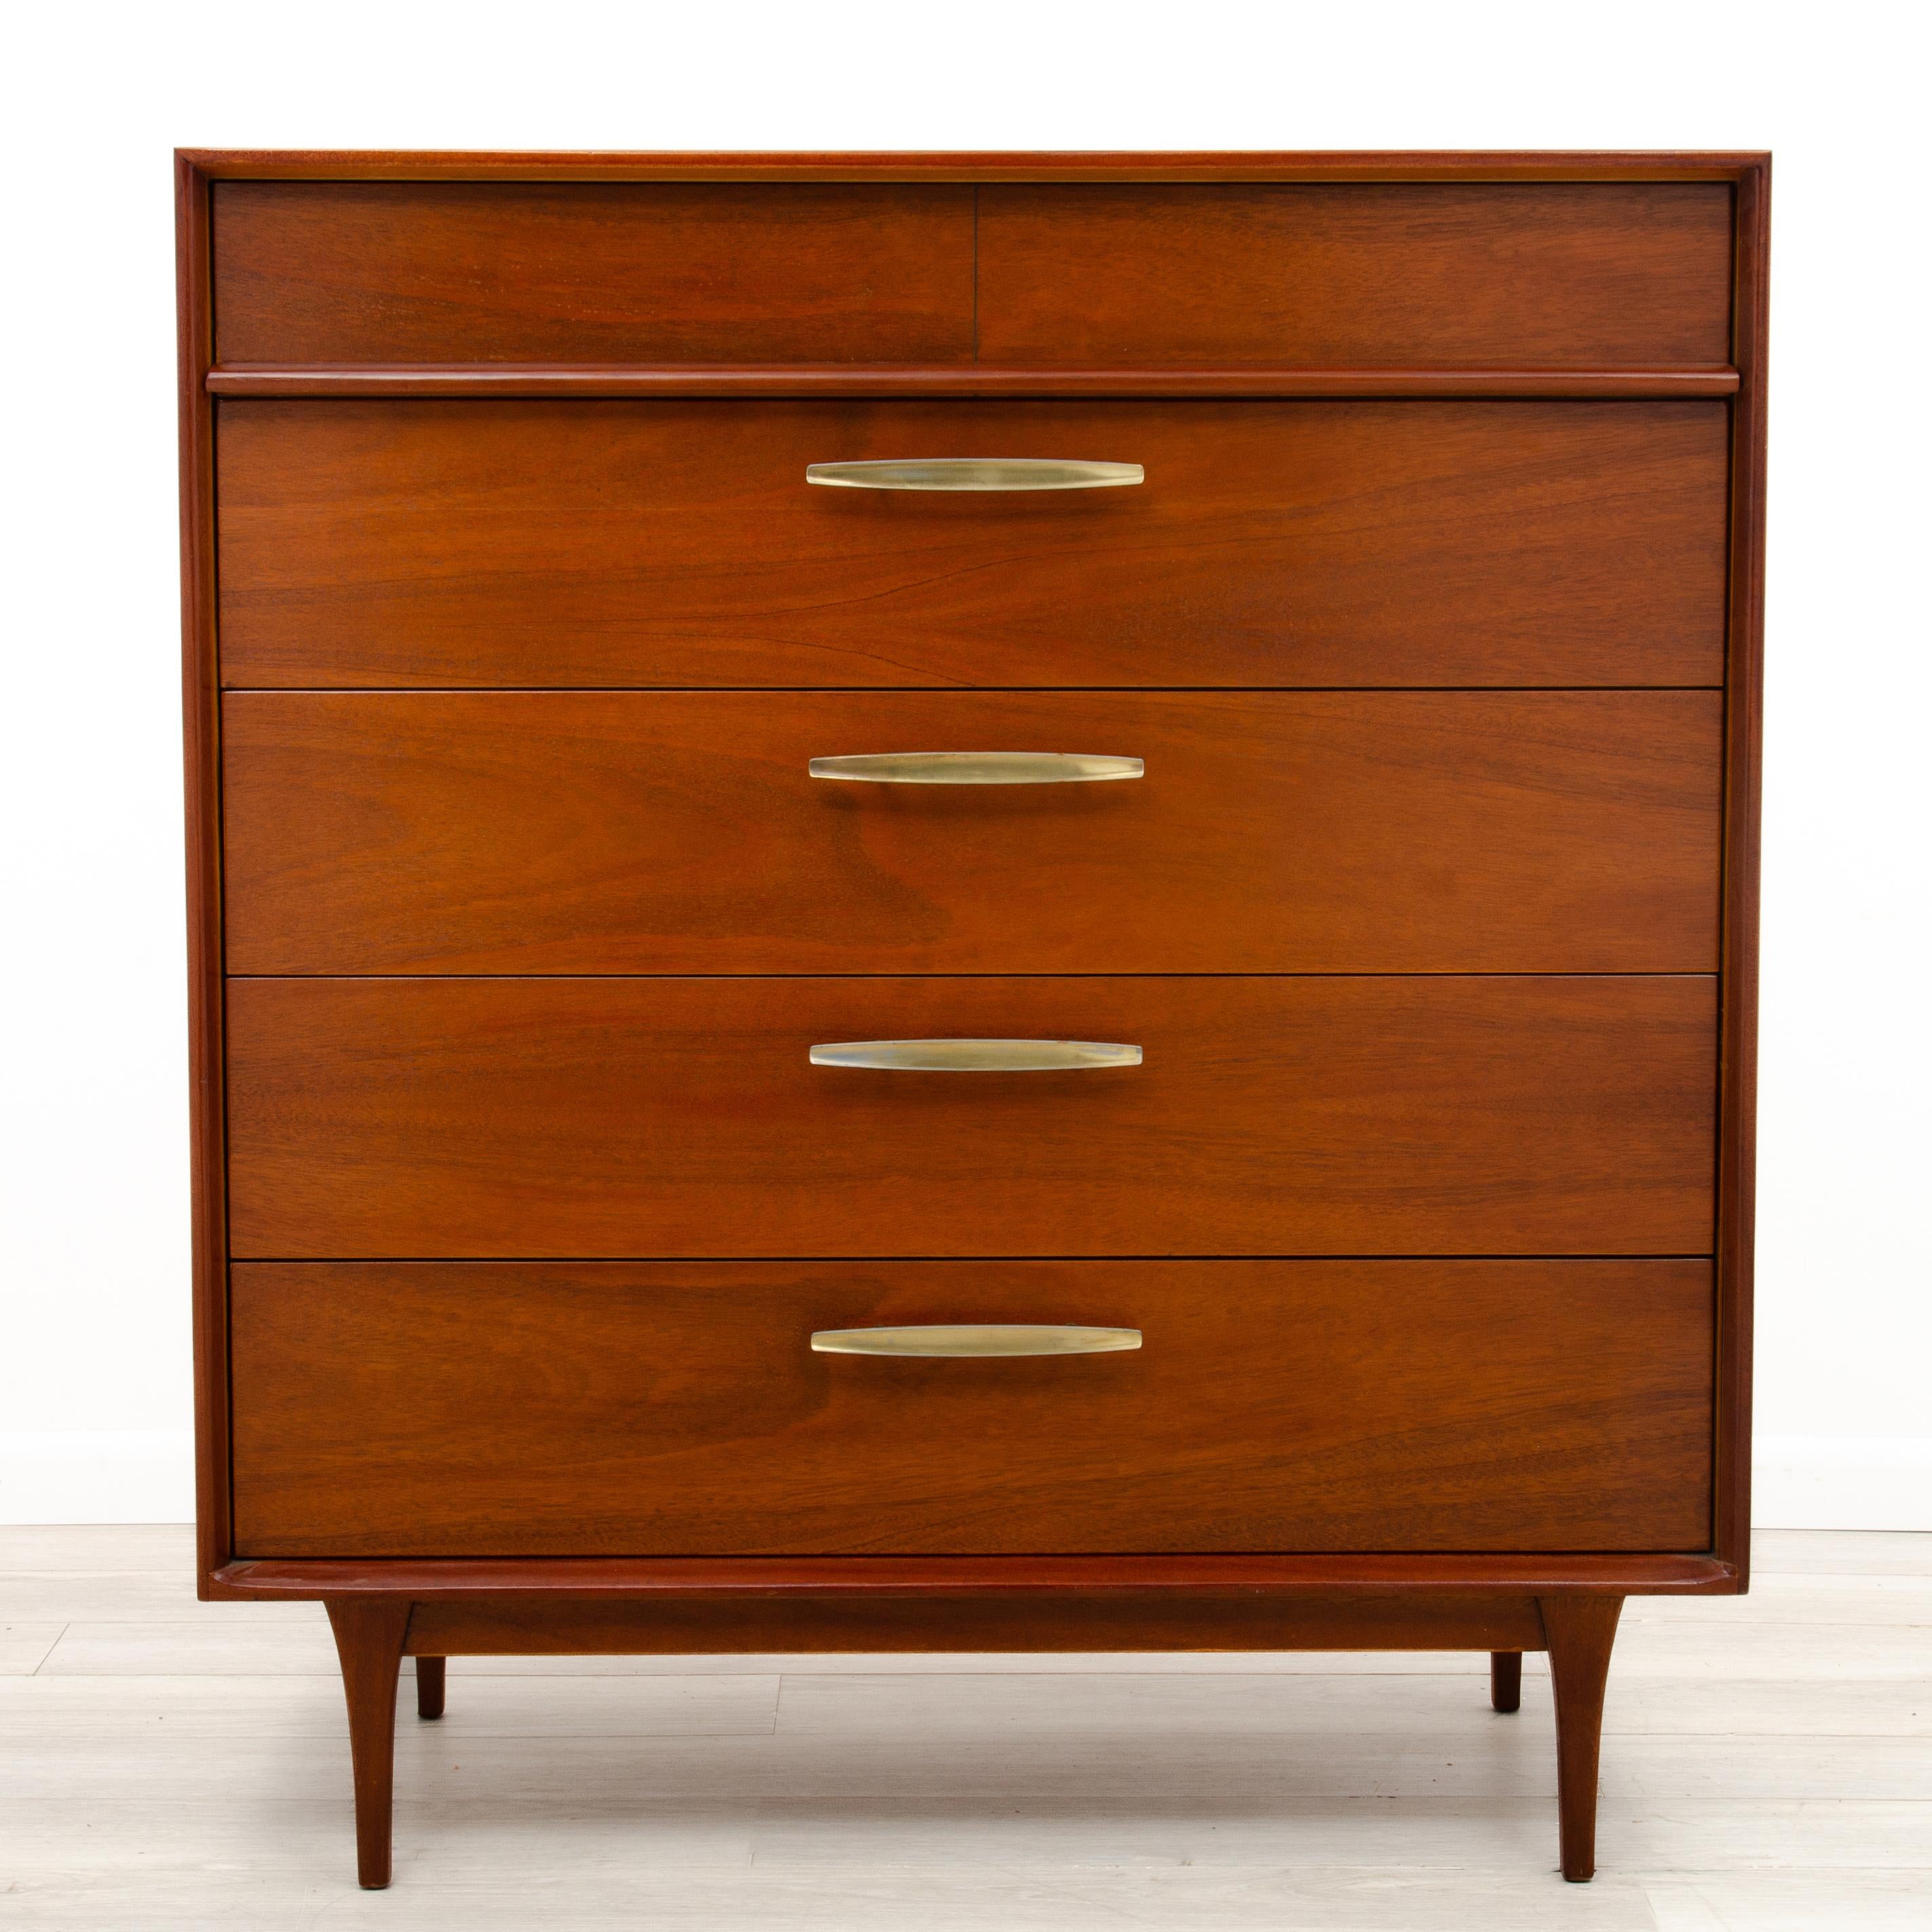 A Mid Century walnut highboy dresser, solid and well made with attention to details. Book matched drawers, one piece veneer tops and sides, quality secondary woods and a nicely finished back. Although we cannot attribute this to a maker, we are